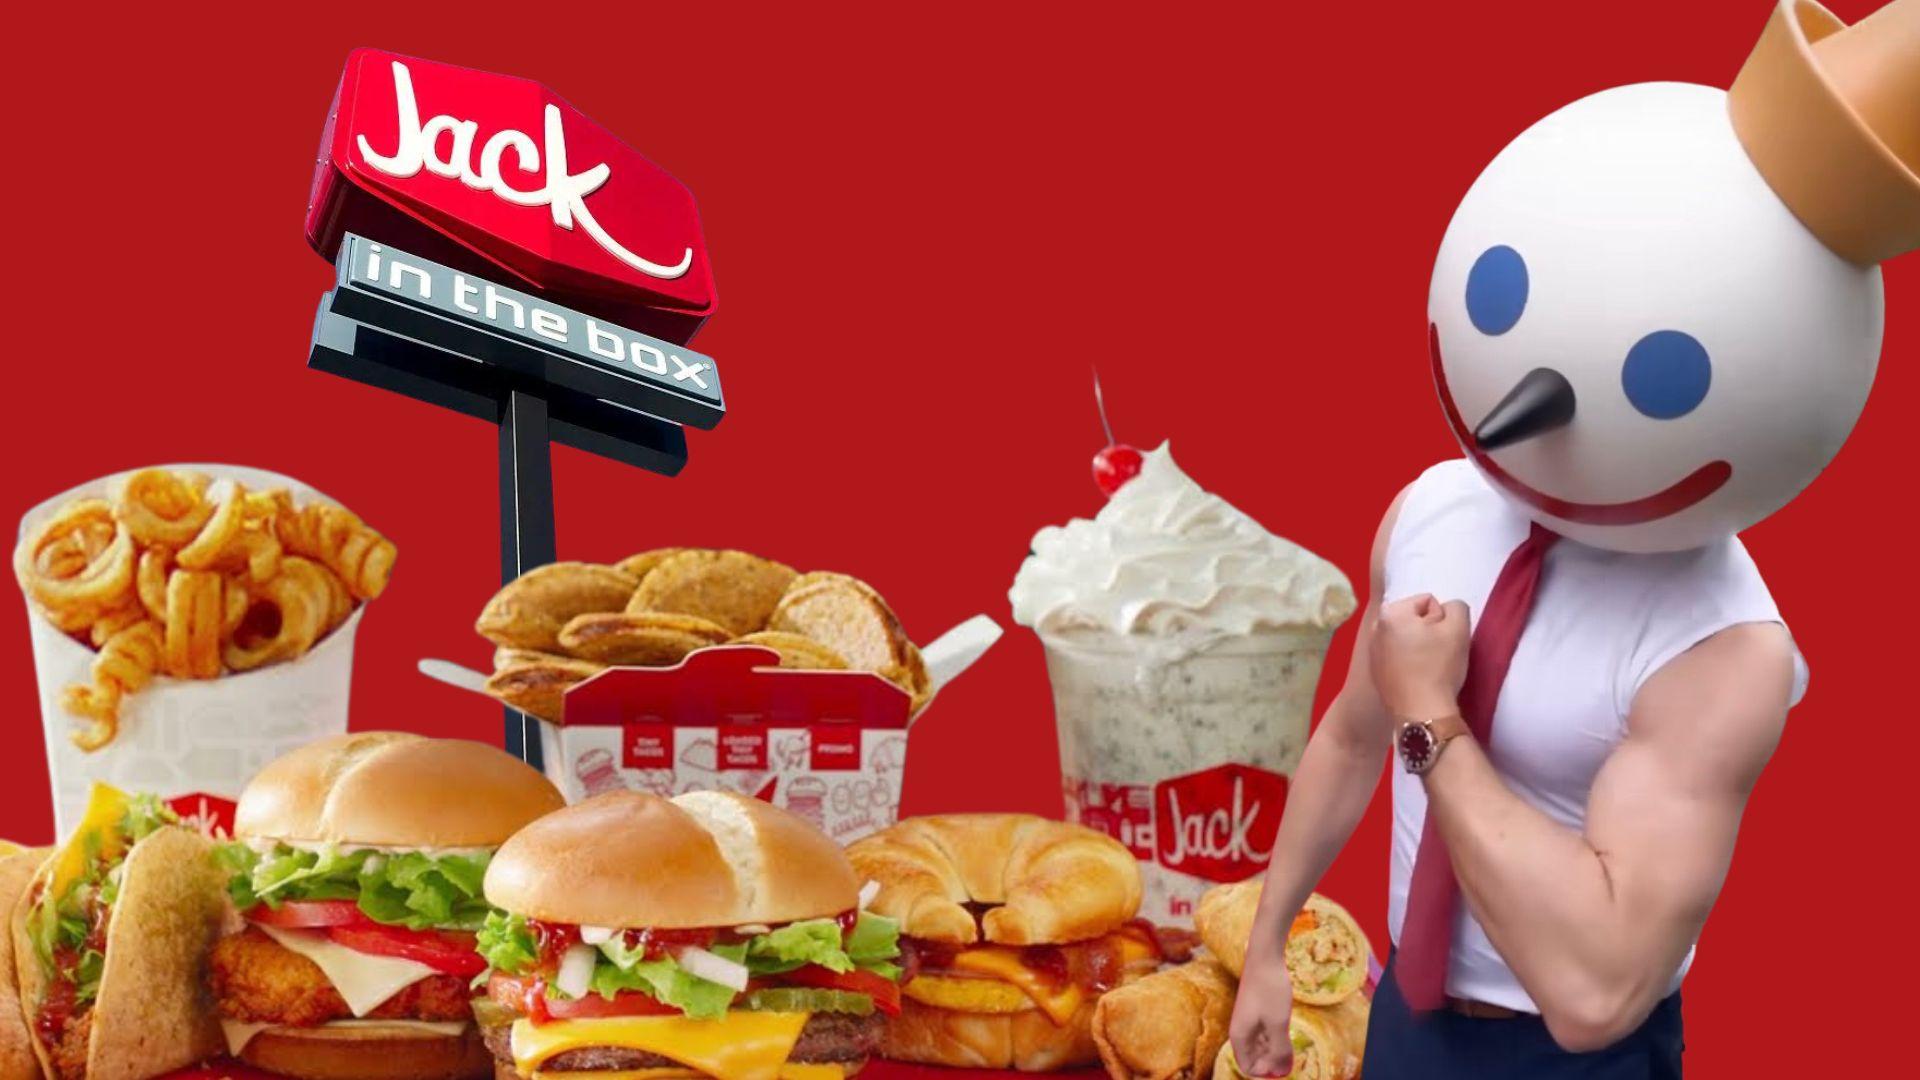 Jack in the box CEO, food, and logo